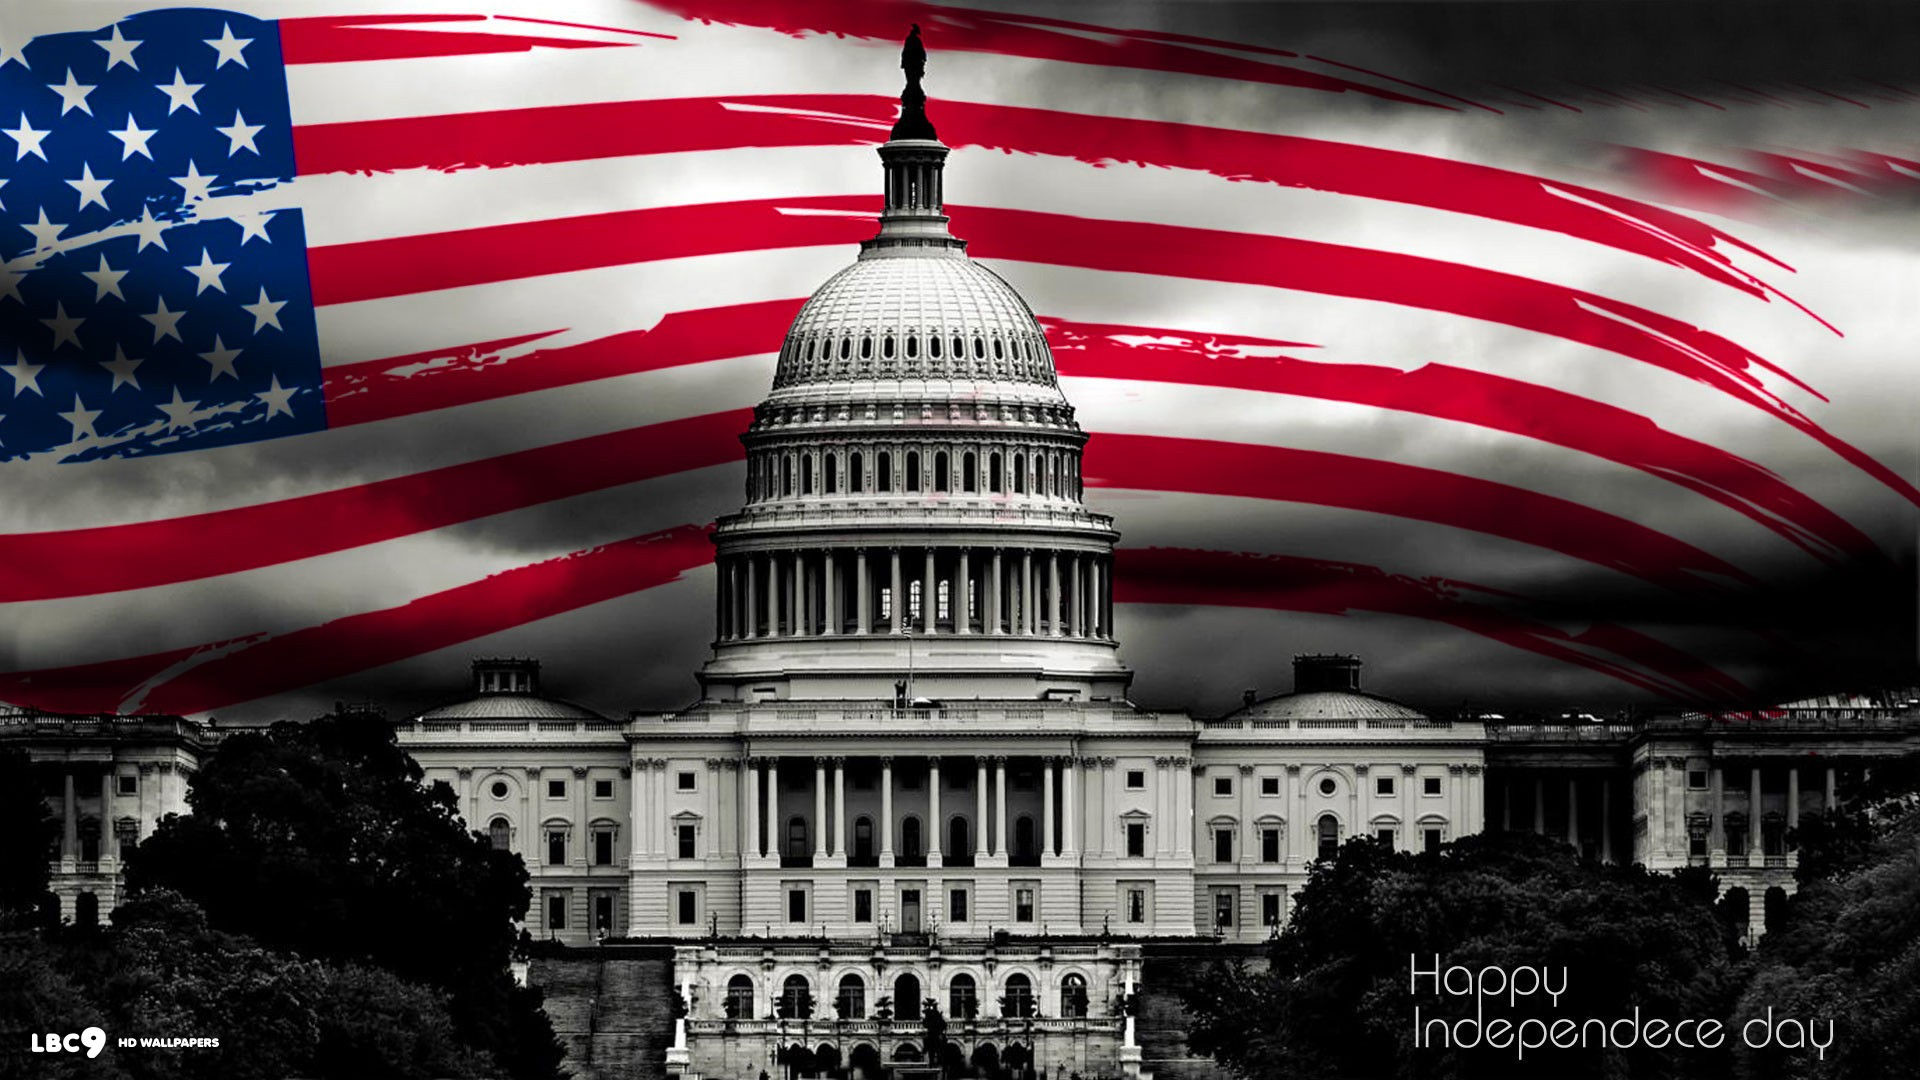 Happy independence day 4th july holiday us flag white house holiday desktop wallpaper